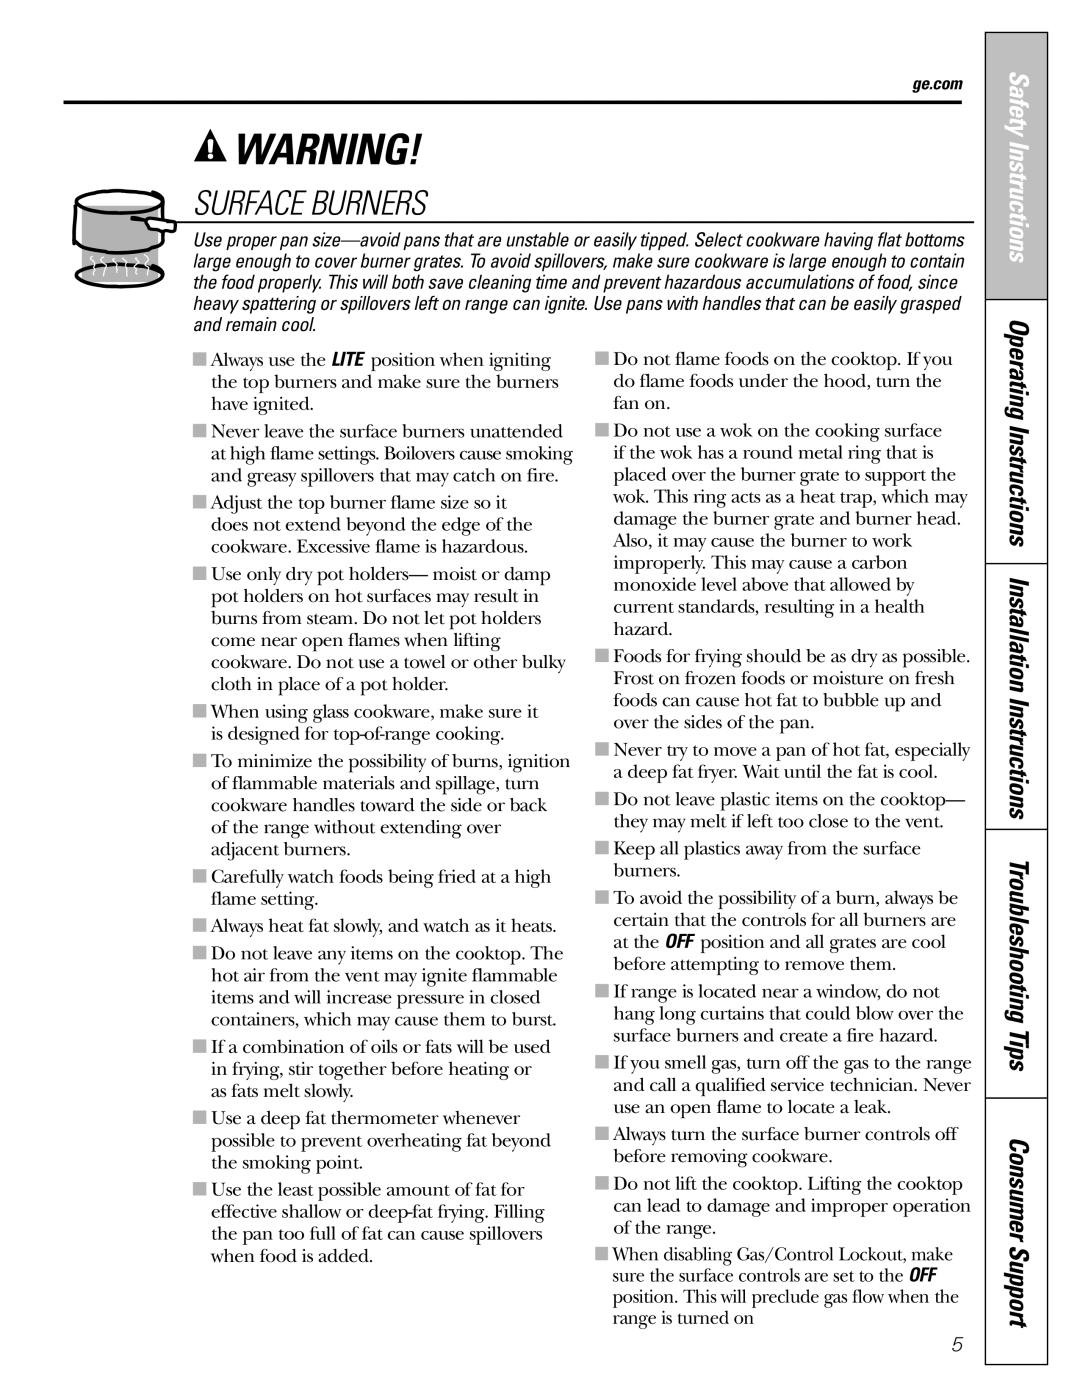 GE CGS980 installation instructions Surface Burners, Safety Instructions 